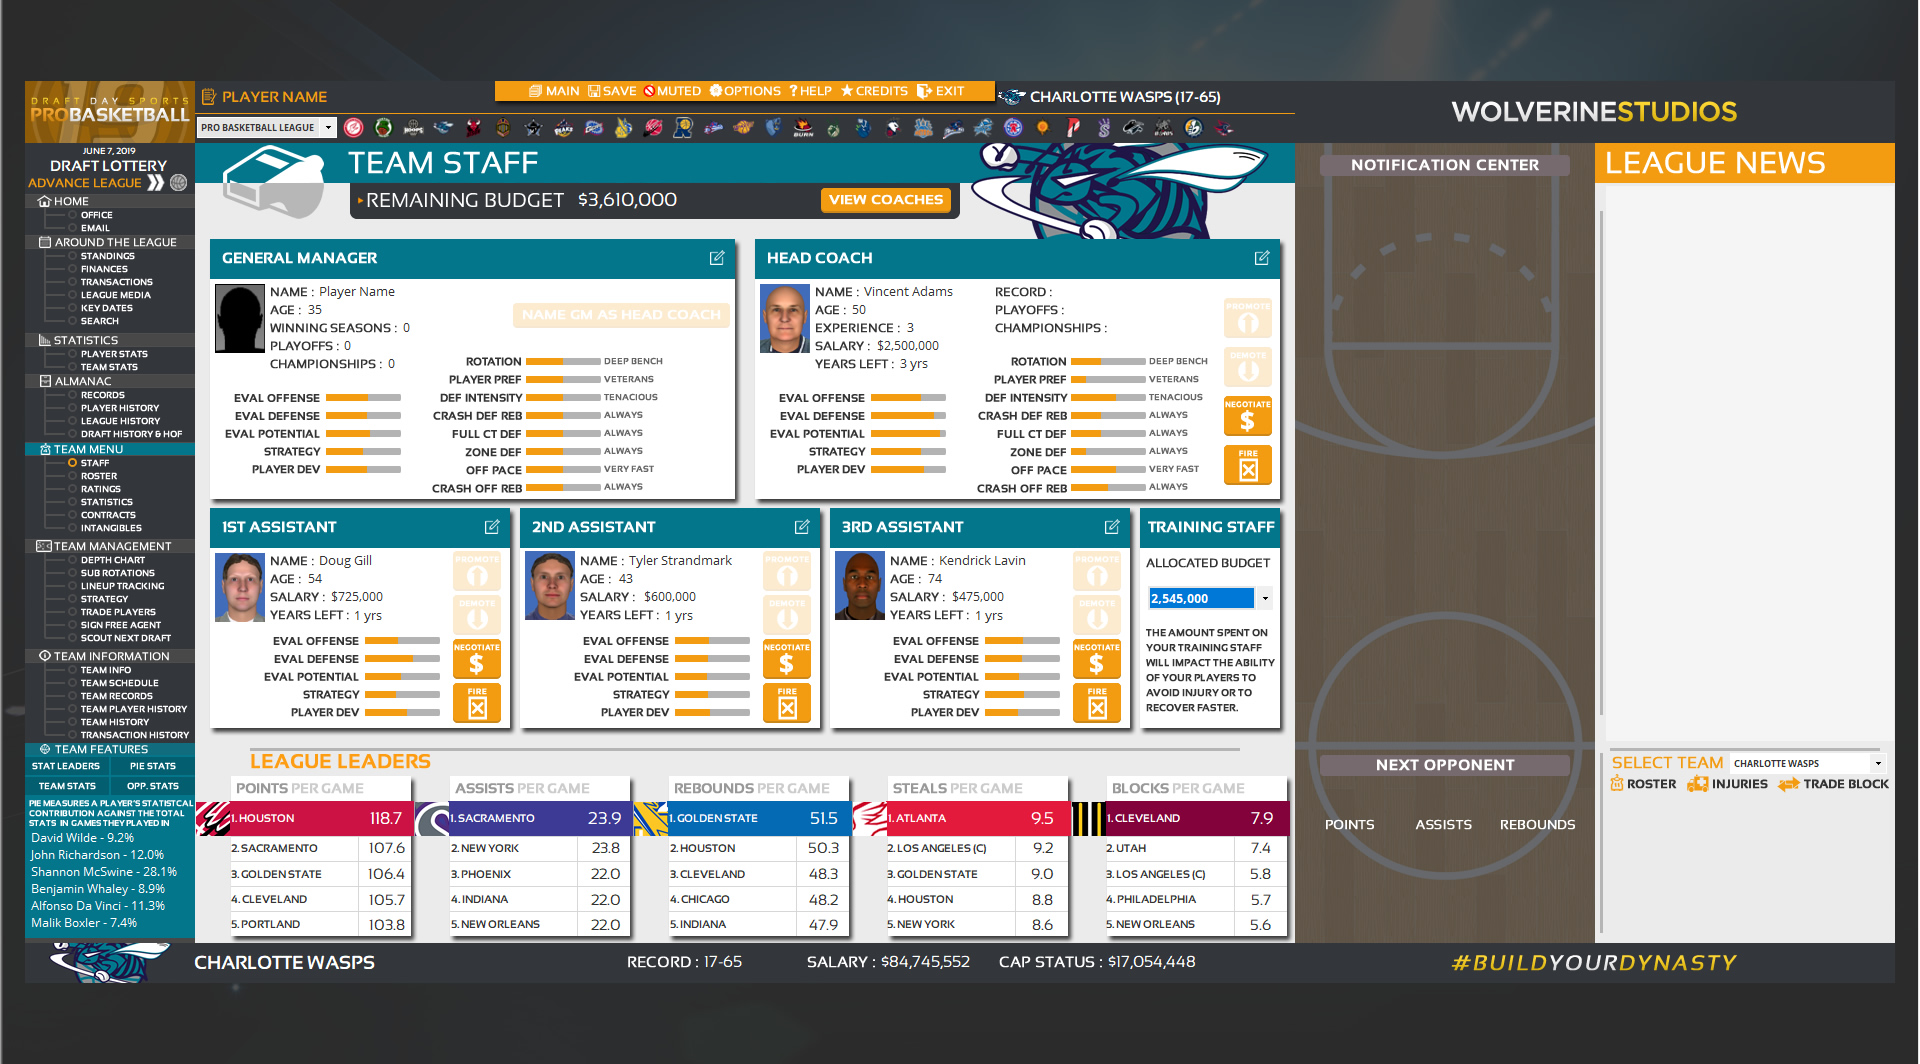 championship manager 4 patch 4.1.4